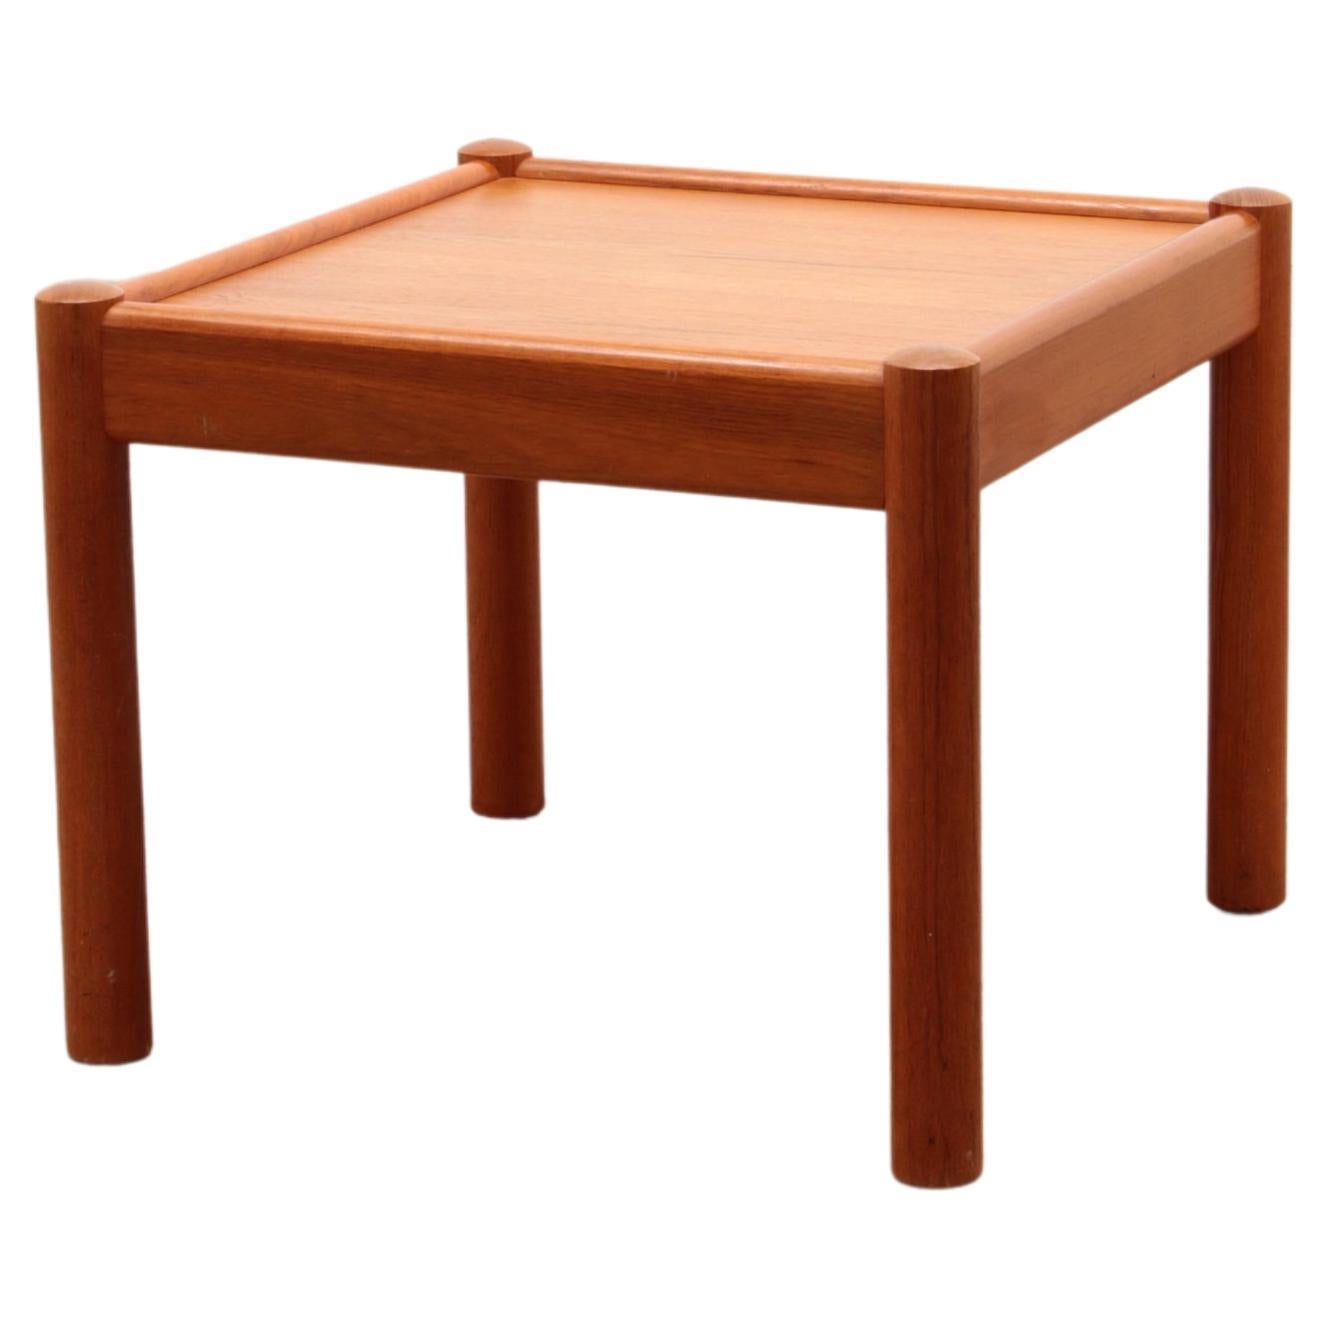 Beautiful Vintage Coffee Table Made of Teak, 1960 Denmark For Sale